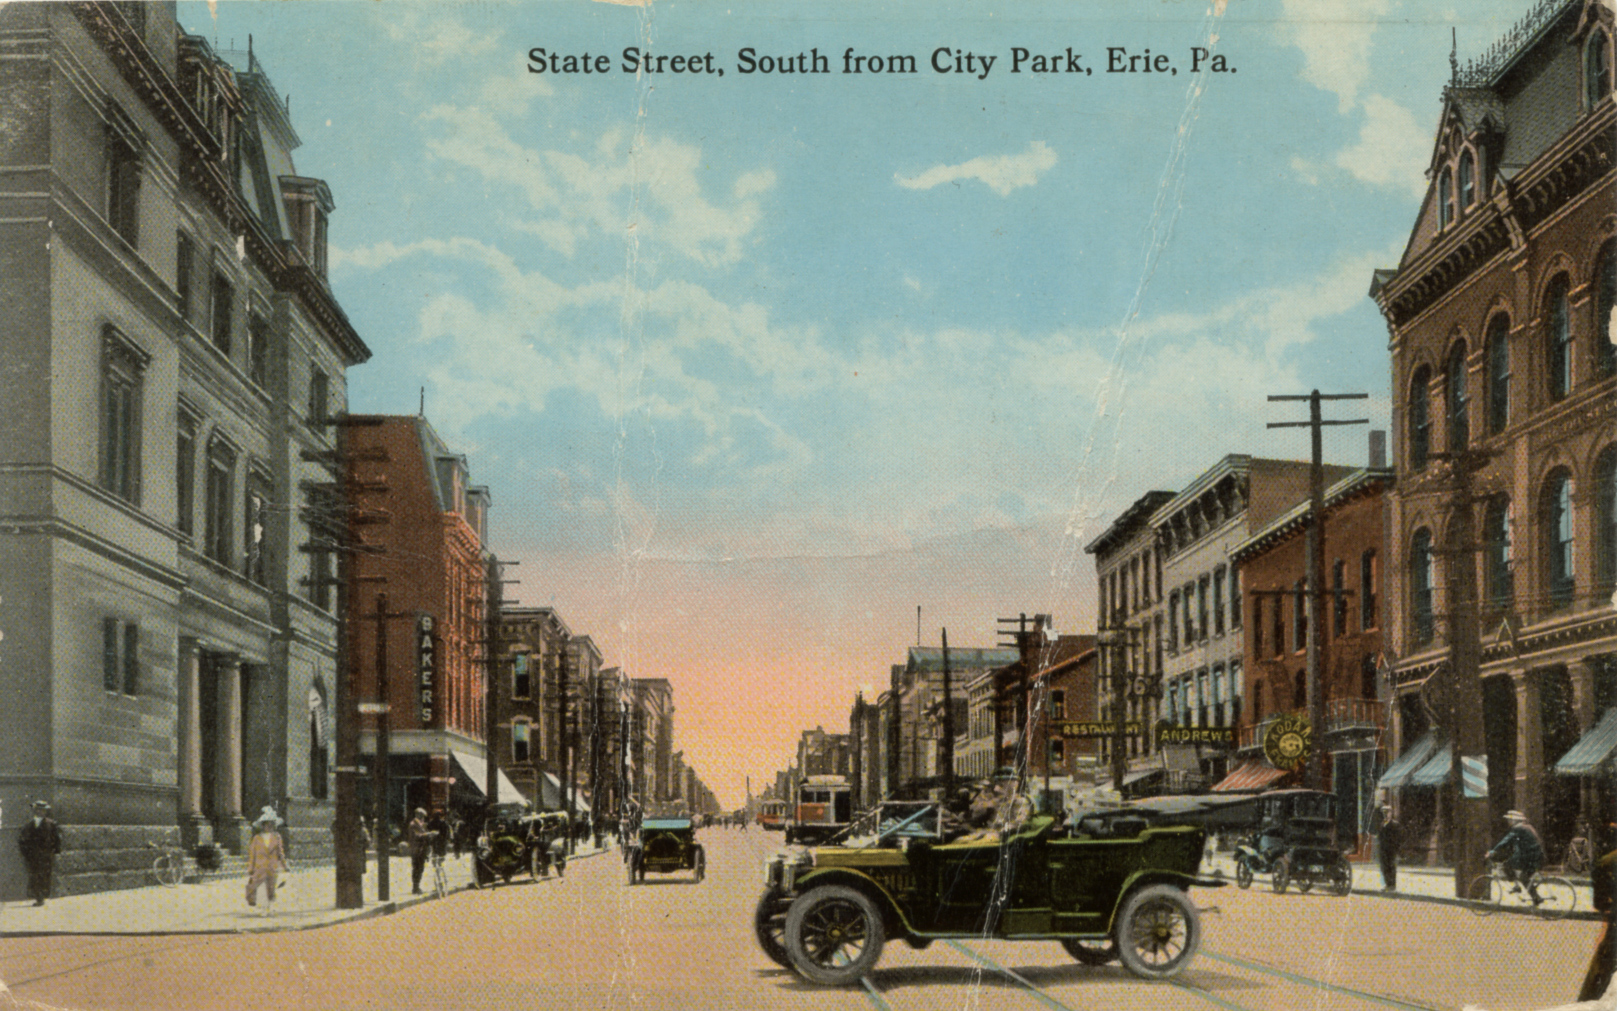 State Street, South from City Park, Erie PA